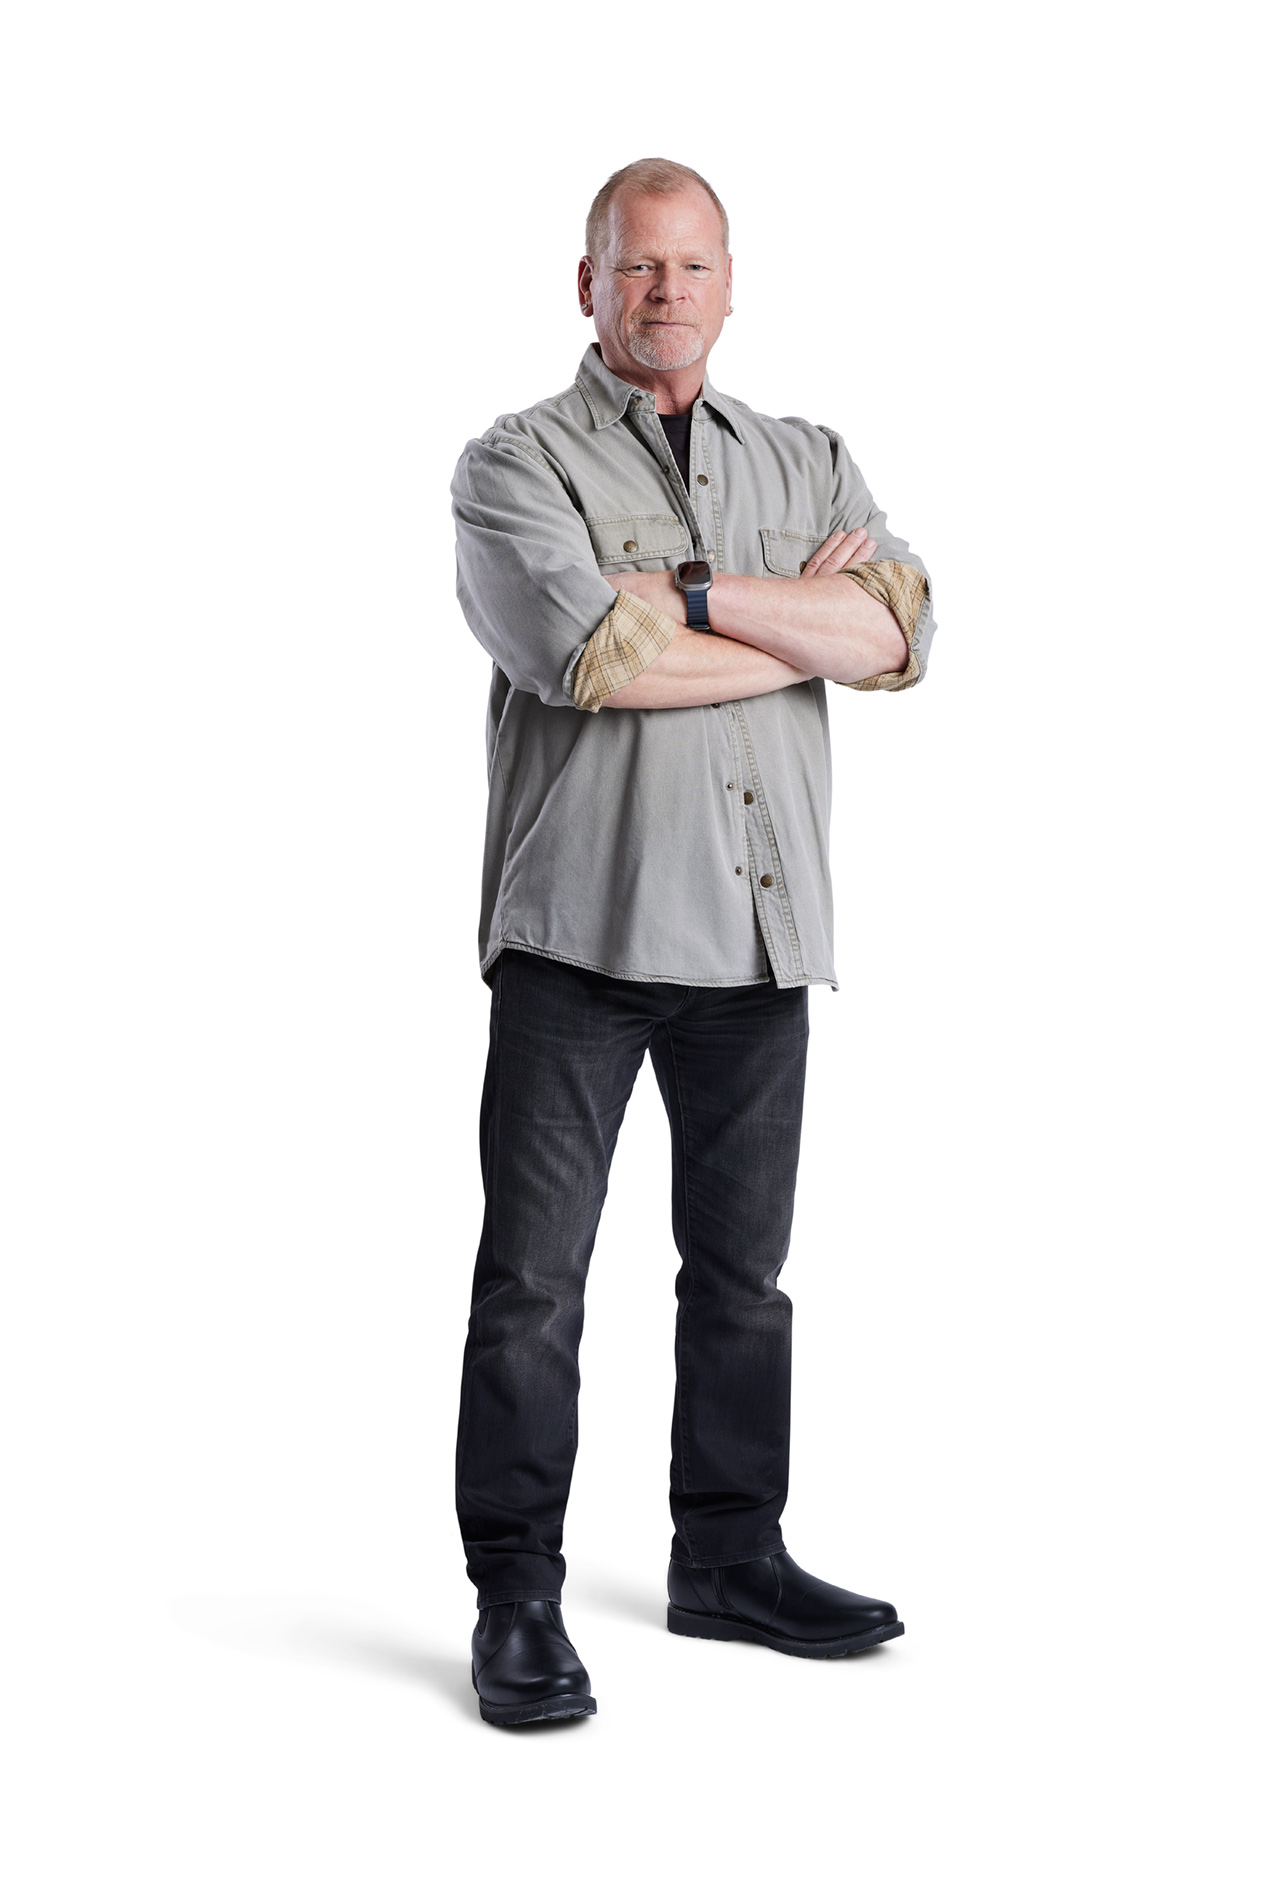 HOMEFUL TV | Mike Holmes